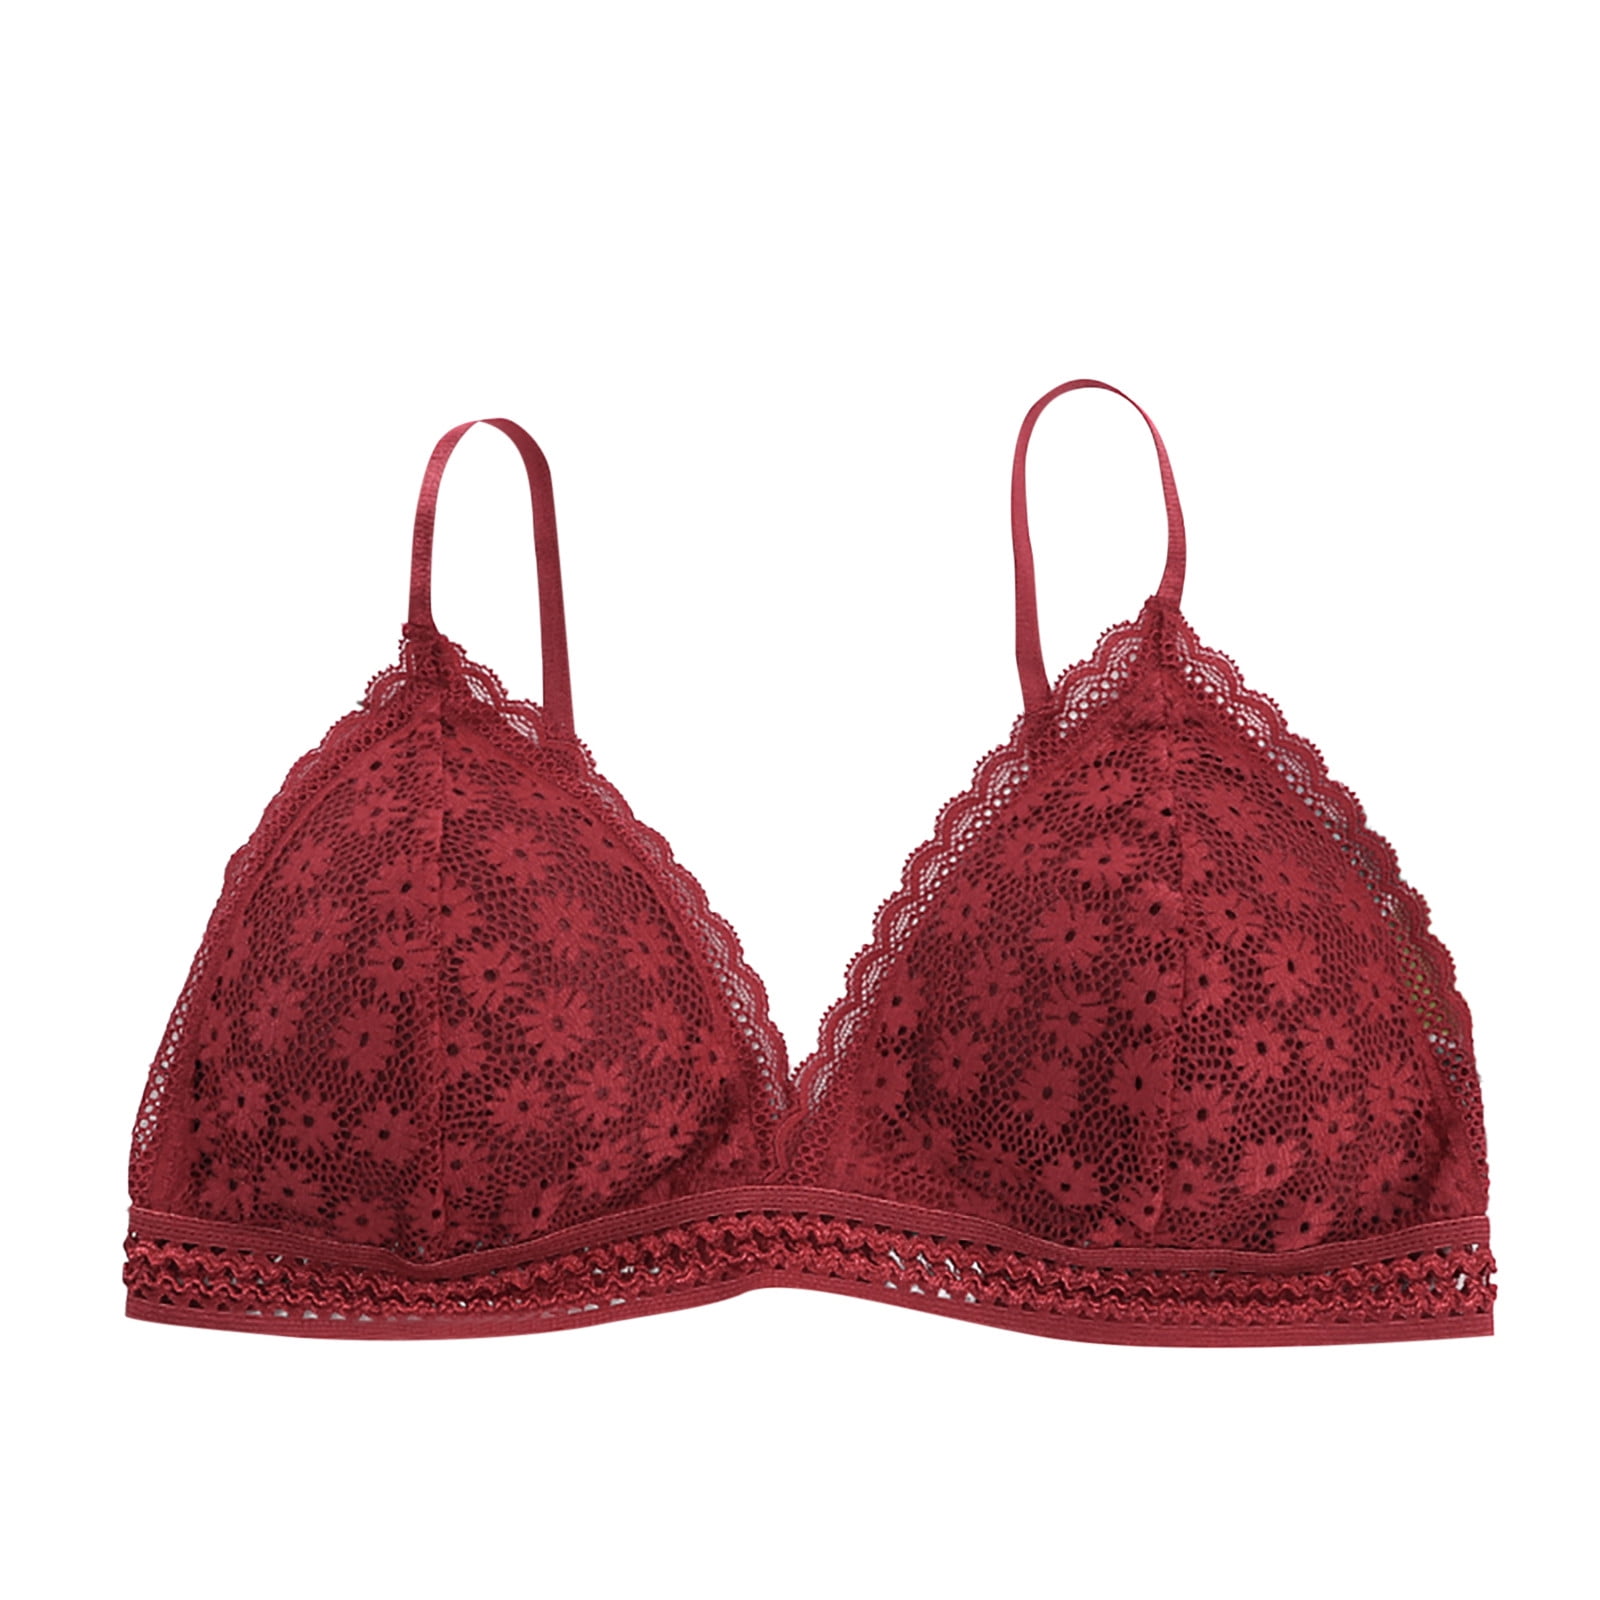 HAPIMO Everyday Bras for Women Gathered Wire Free Soft Ultra Light